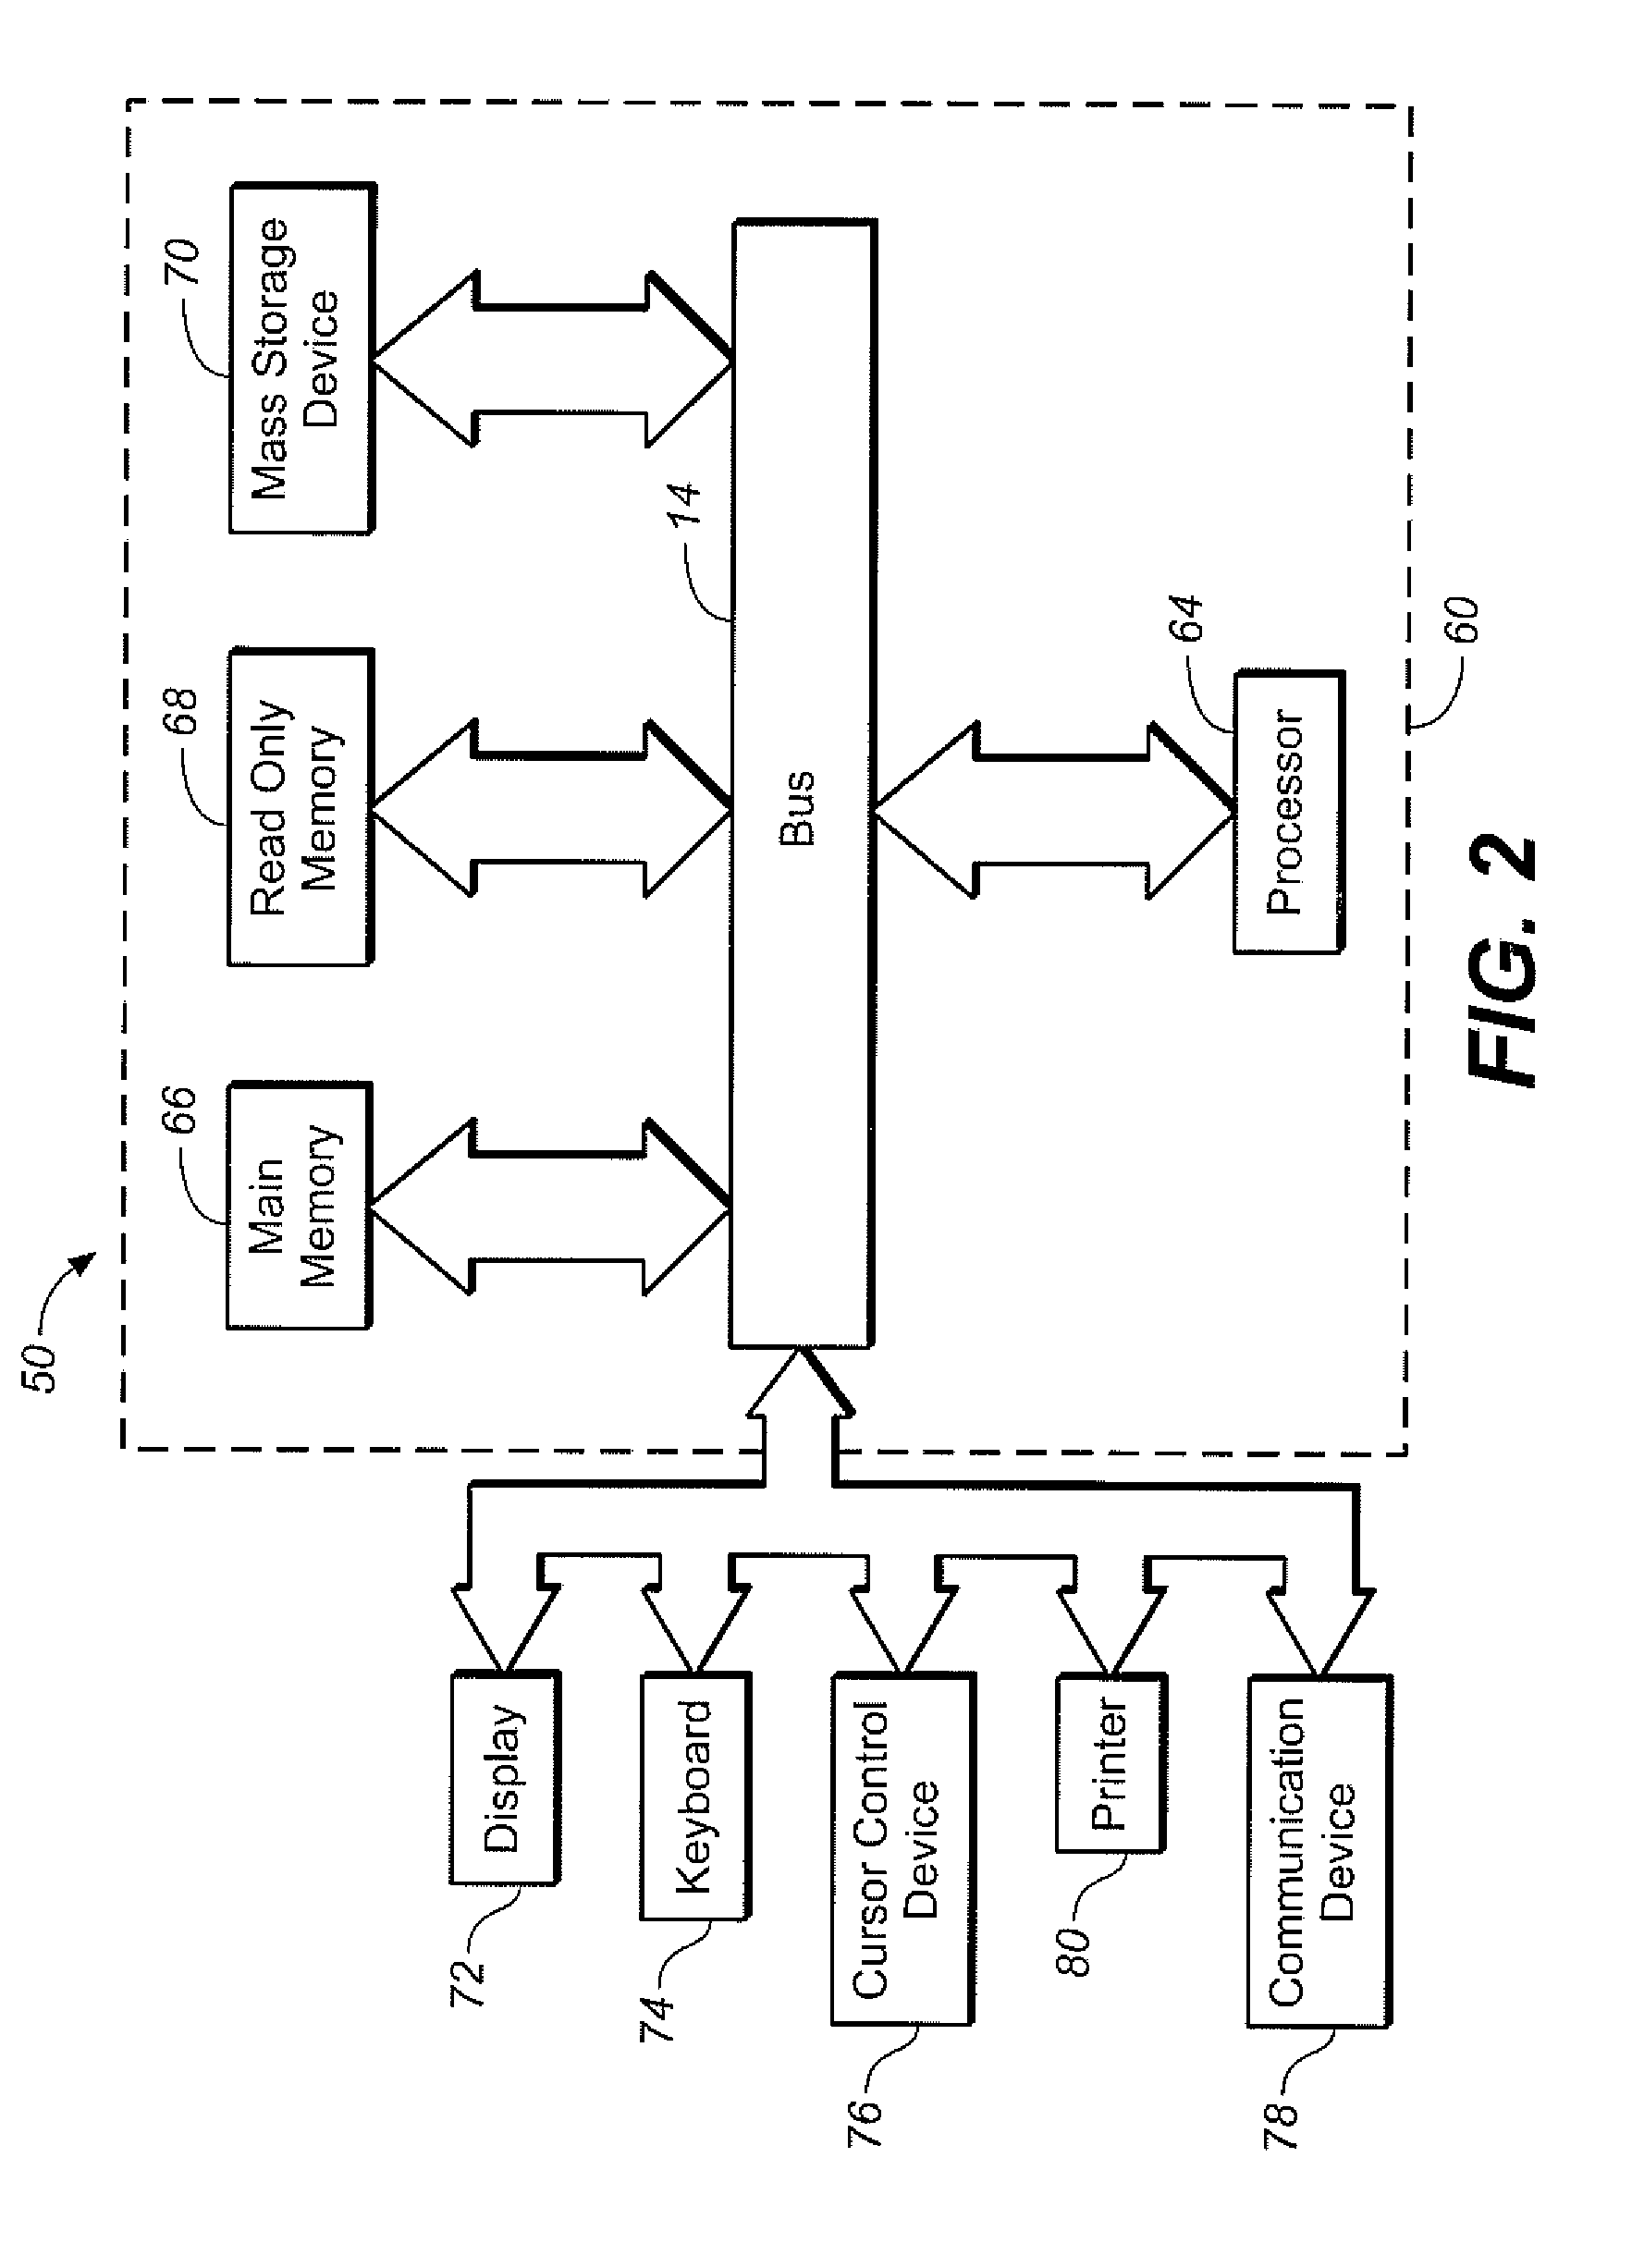 System and method for providing utility consumption as shown on periodic utility bills and associated carbon emissions